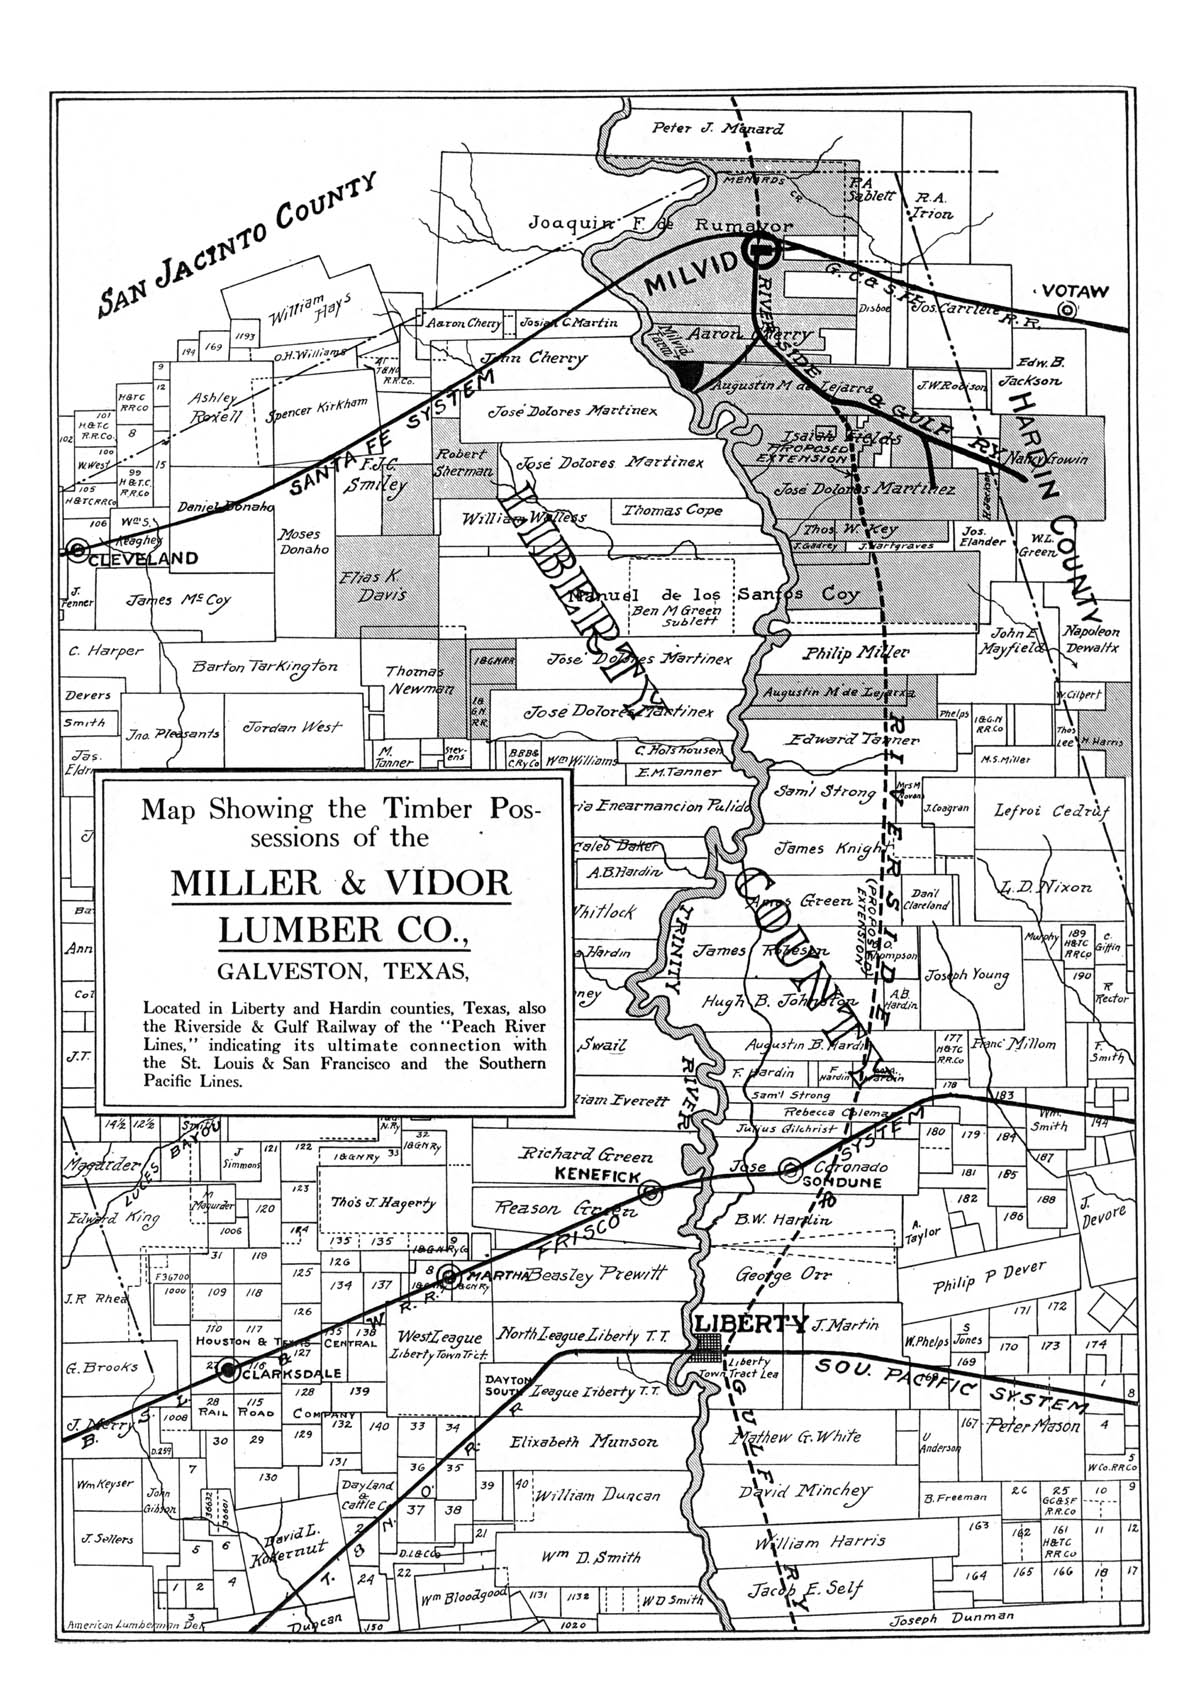 Riverside & Gulf Railroad Company (Tex.), Map Showing Route in 1910.